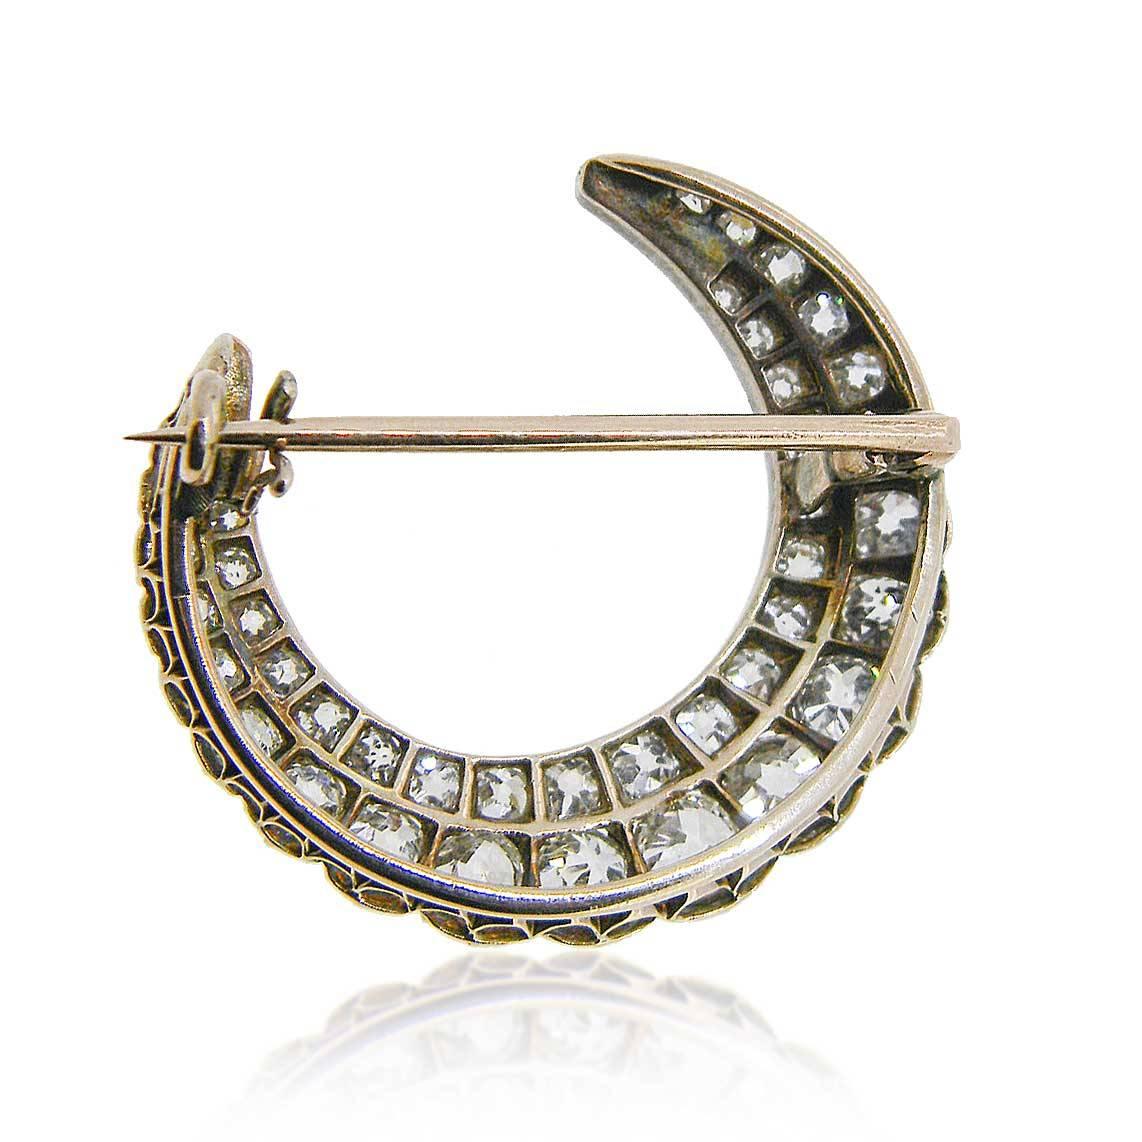 Superb Circa 1890 Victorian crescent moon brooch set with old mine cut diamonds, estimated total diamond weight 40=3.70cts G-I Vs-Si2.

In candlelight this brooch would have caught everyone's eye, today the same would be the case. Beautifully set